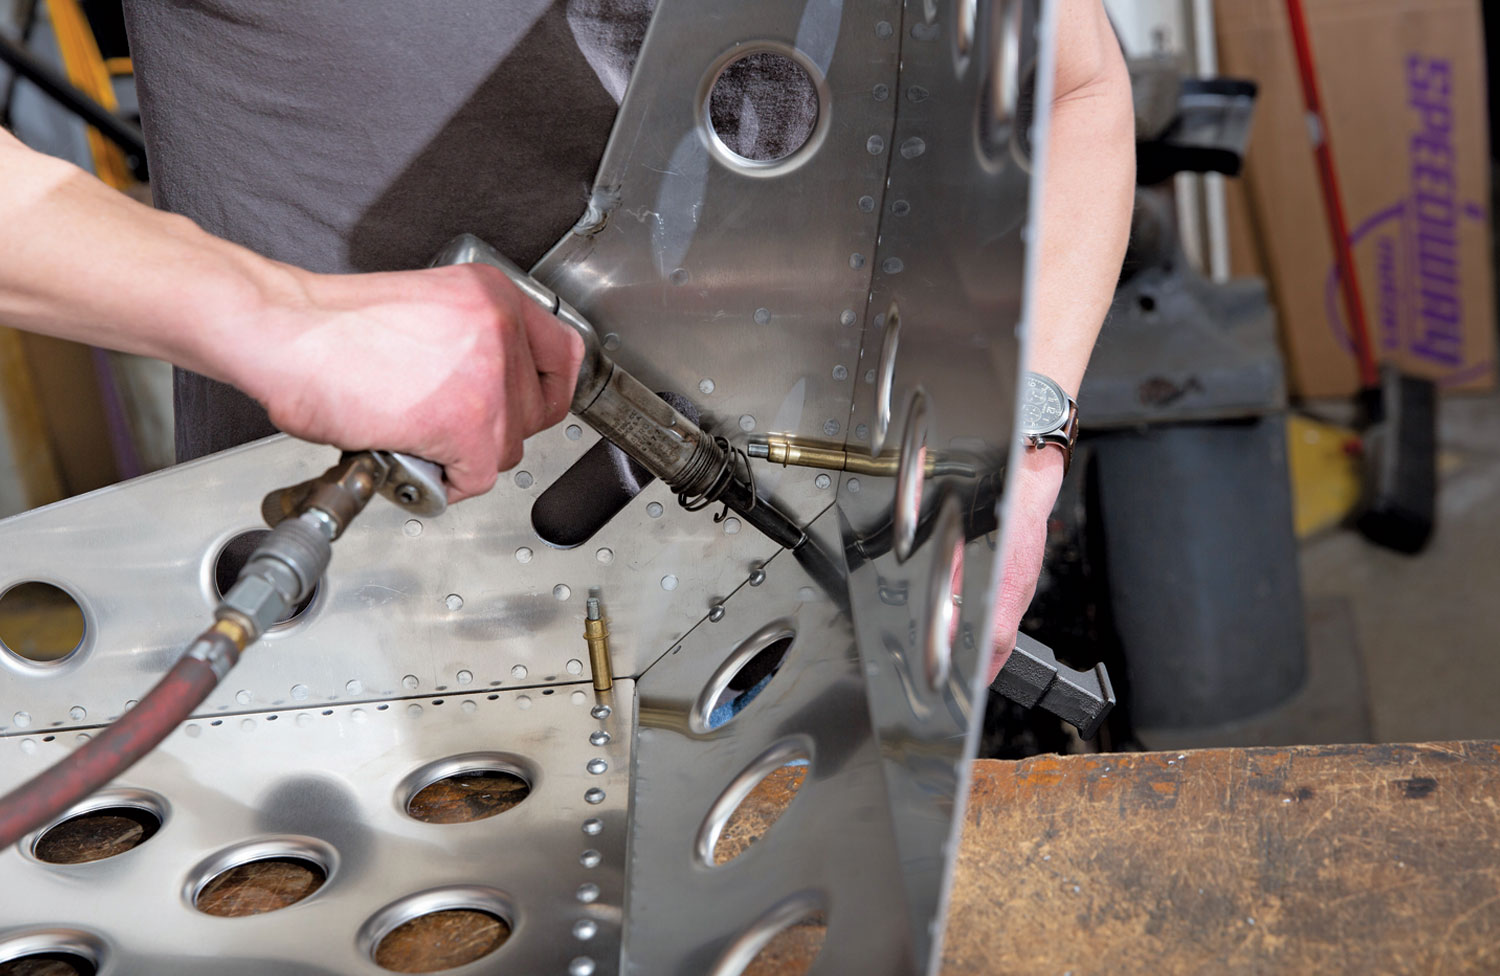 using the rivet tool and bucking bar, the mechanic begins the riveting process